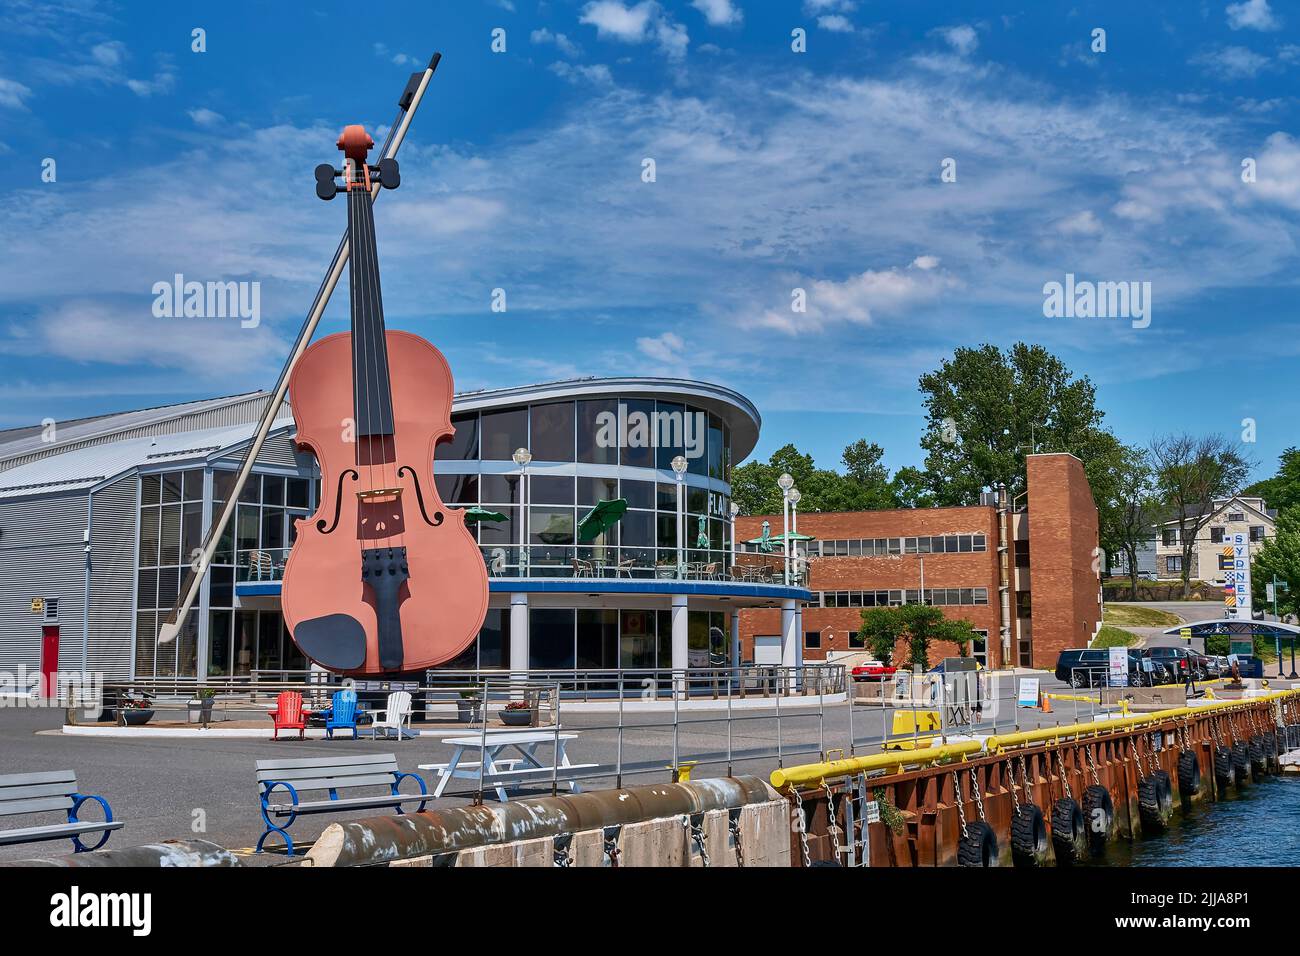 The world's largest fiddle is located on the waterfront in Sydney Nova Scotia.  Reaching a height of 60 feet, the landmark greets the many visitors wh Stock Photo